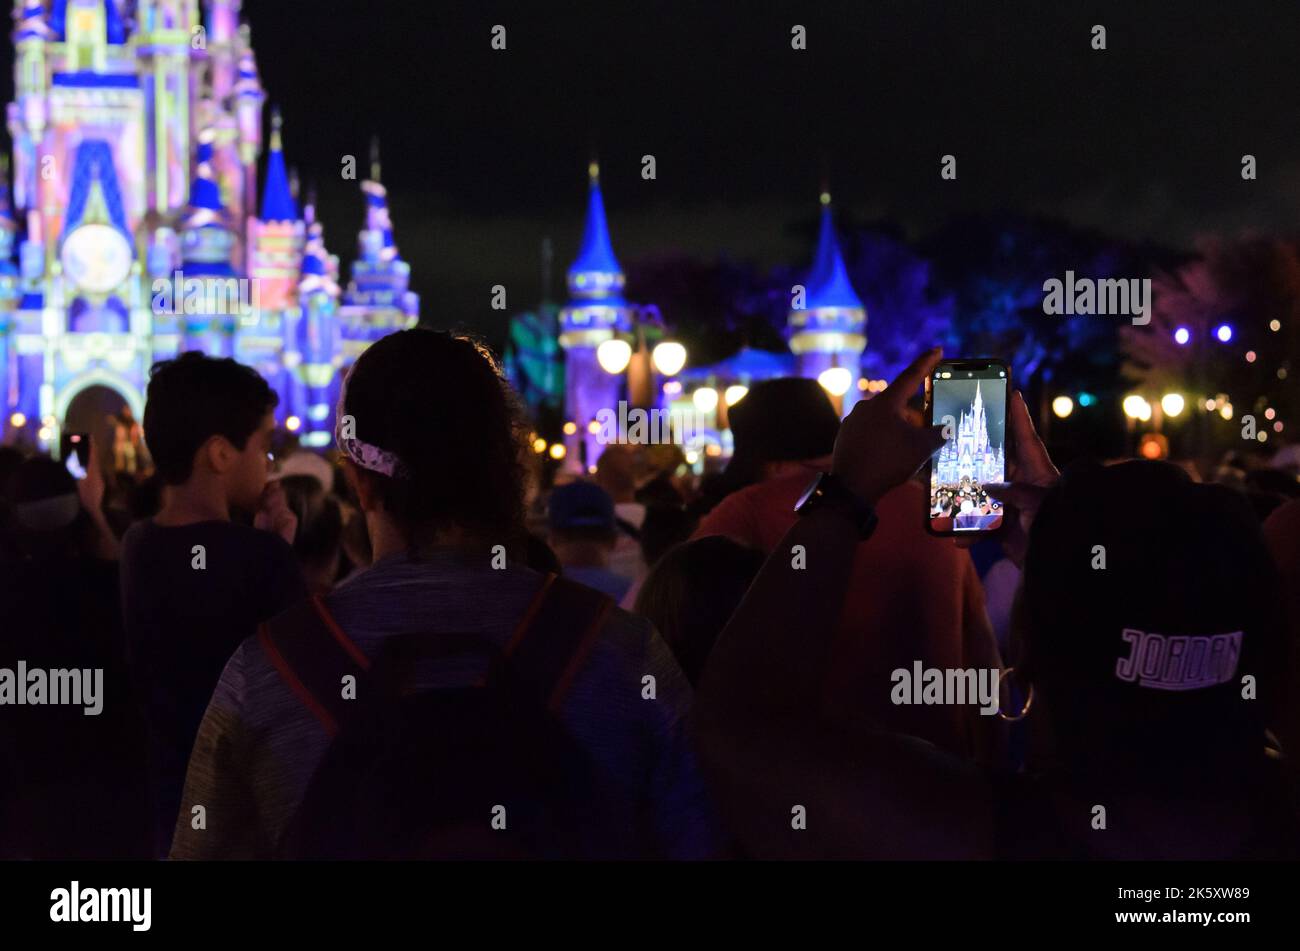 A person capturing a photo of the Disney Castle on their cell phone at Disney World in Orlando, Florida. Stock Photo